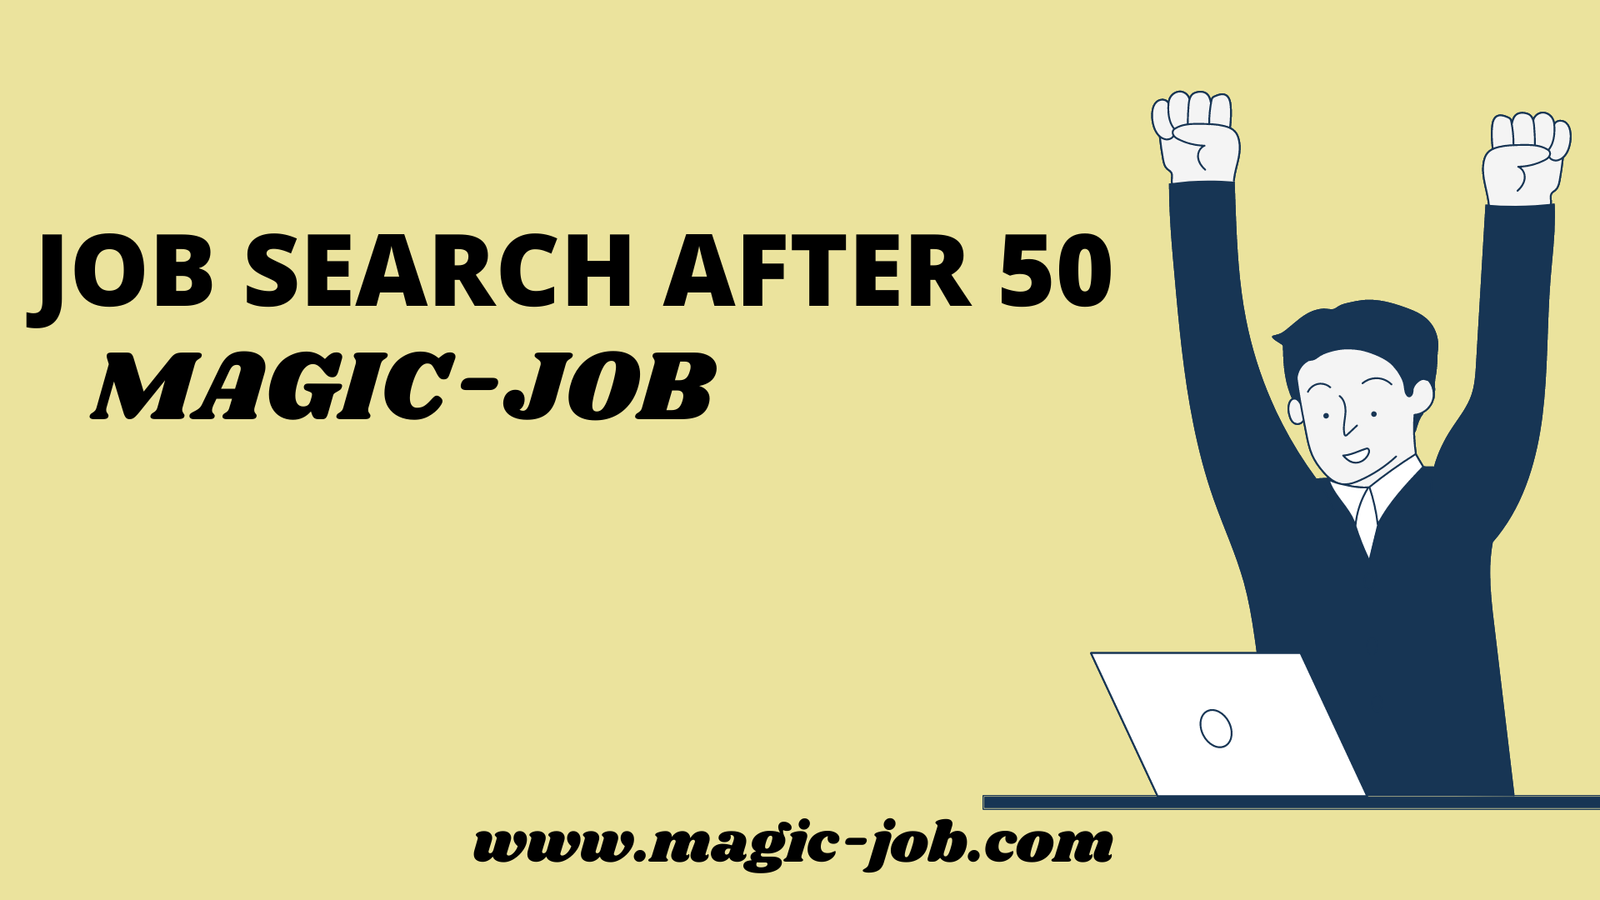 Are you looking for a job after 50? Maximize your success. image